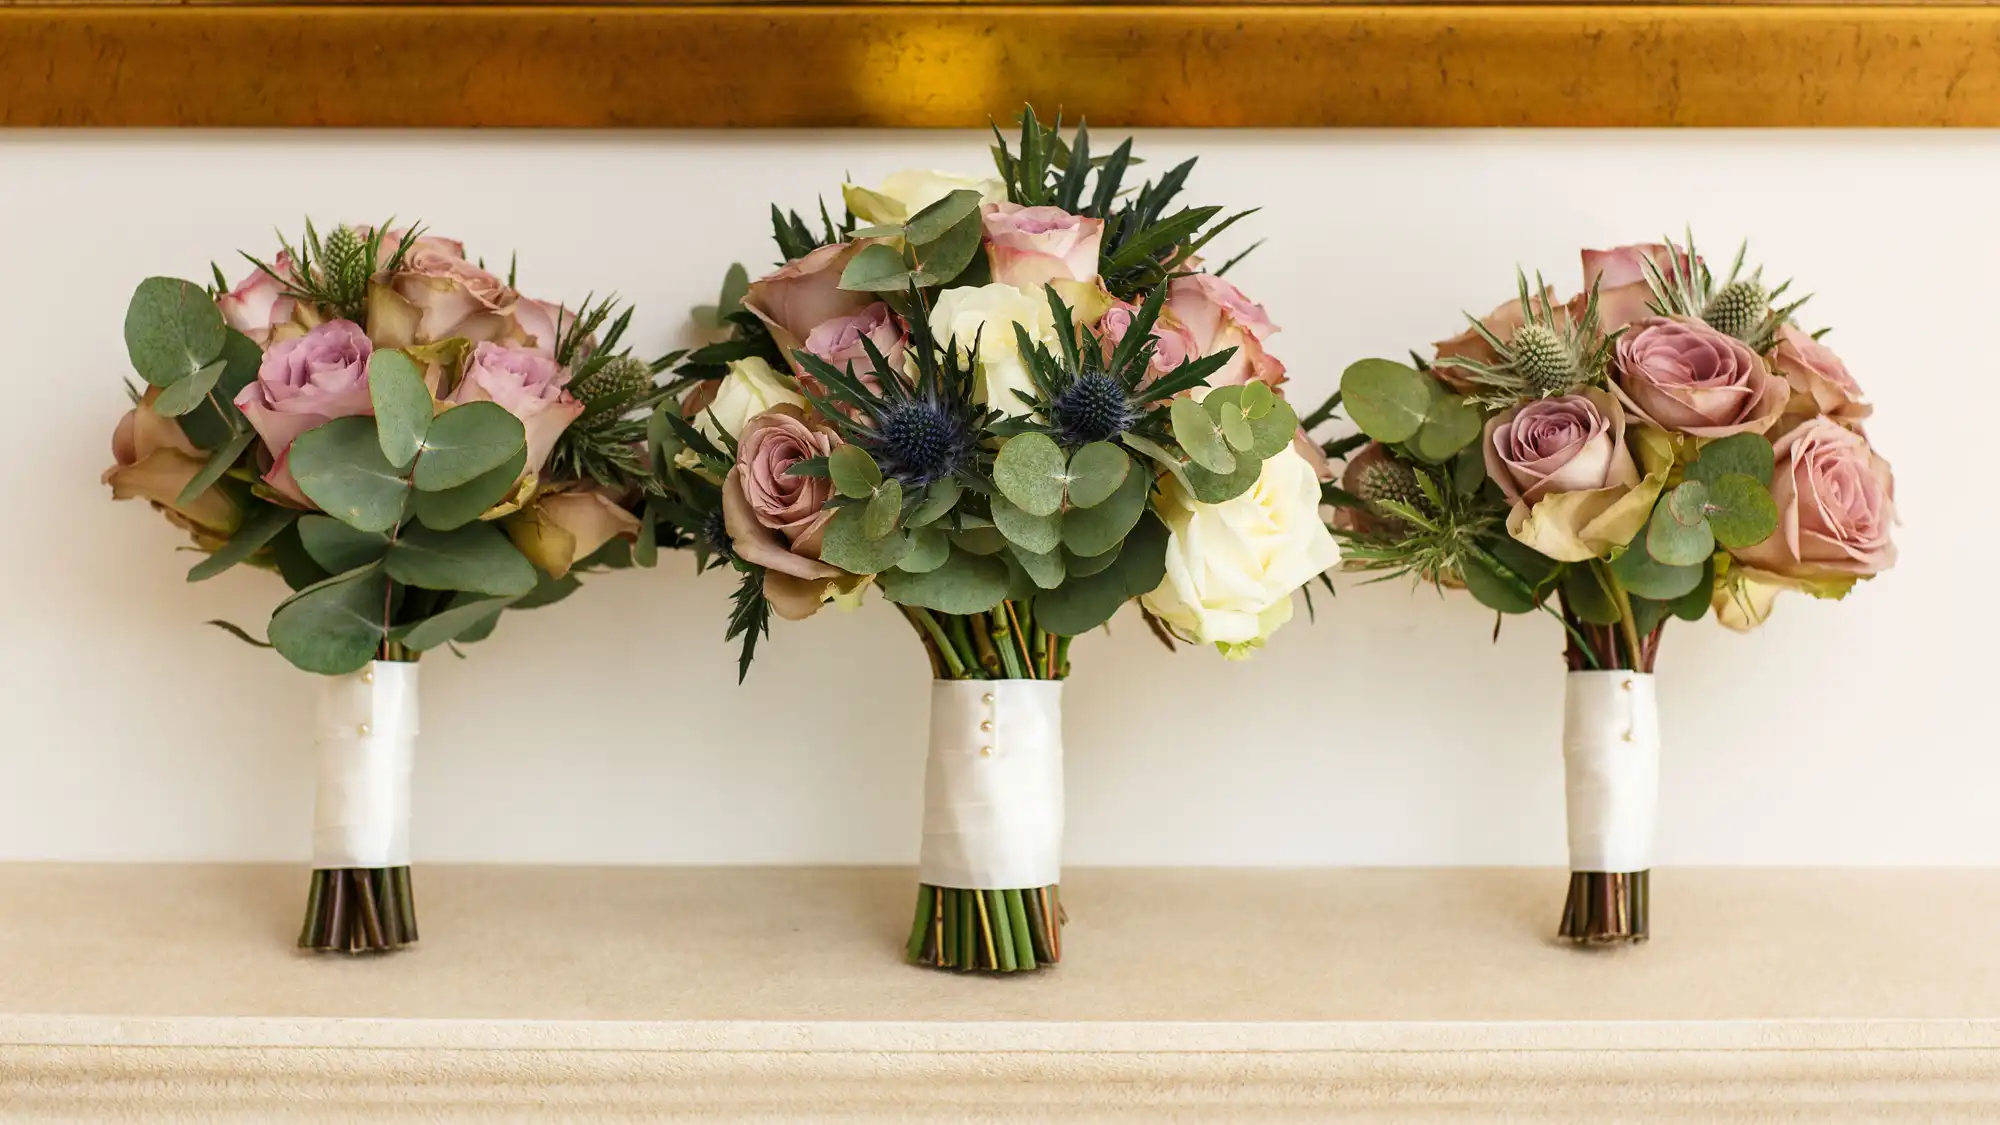 Three bridal bouquets with pink roses, white flowers, and blue thistles, wrapped in white ribbons, displayed on a table.